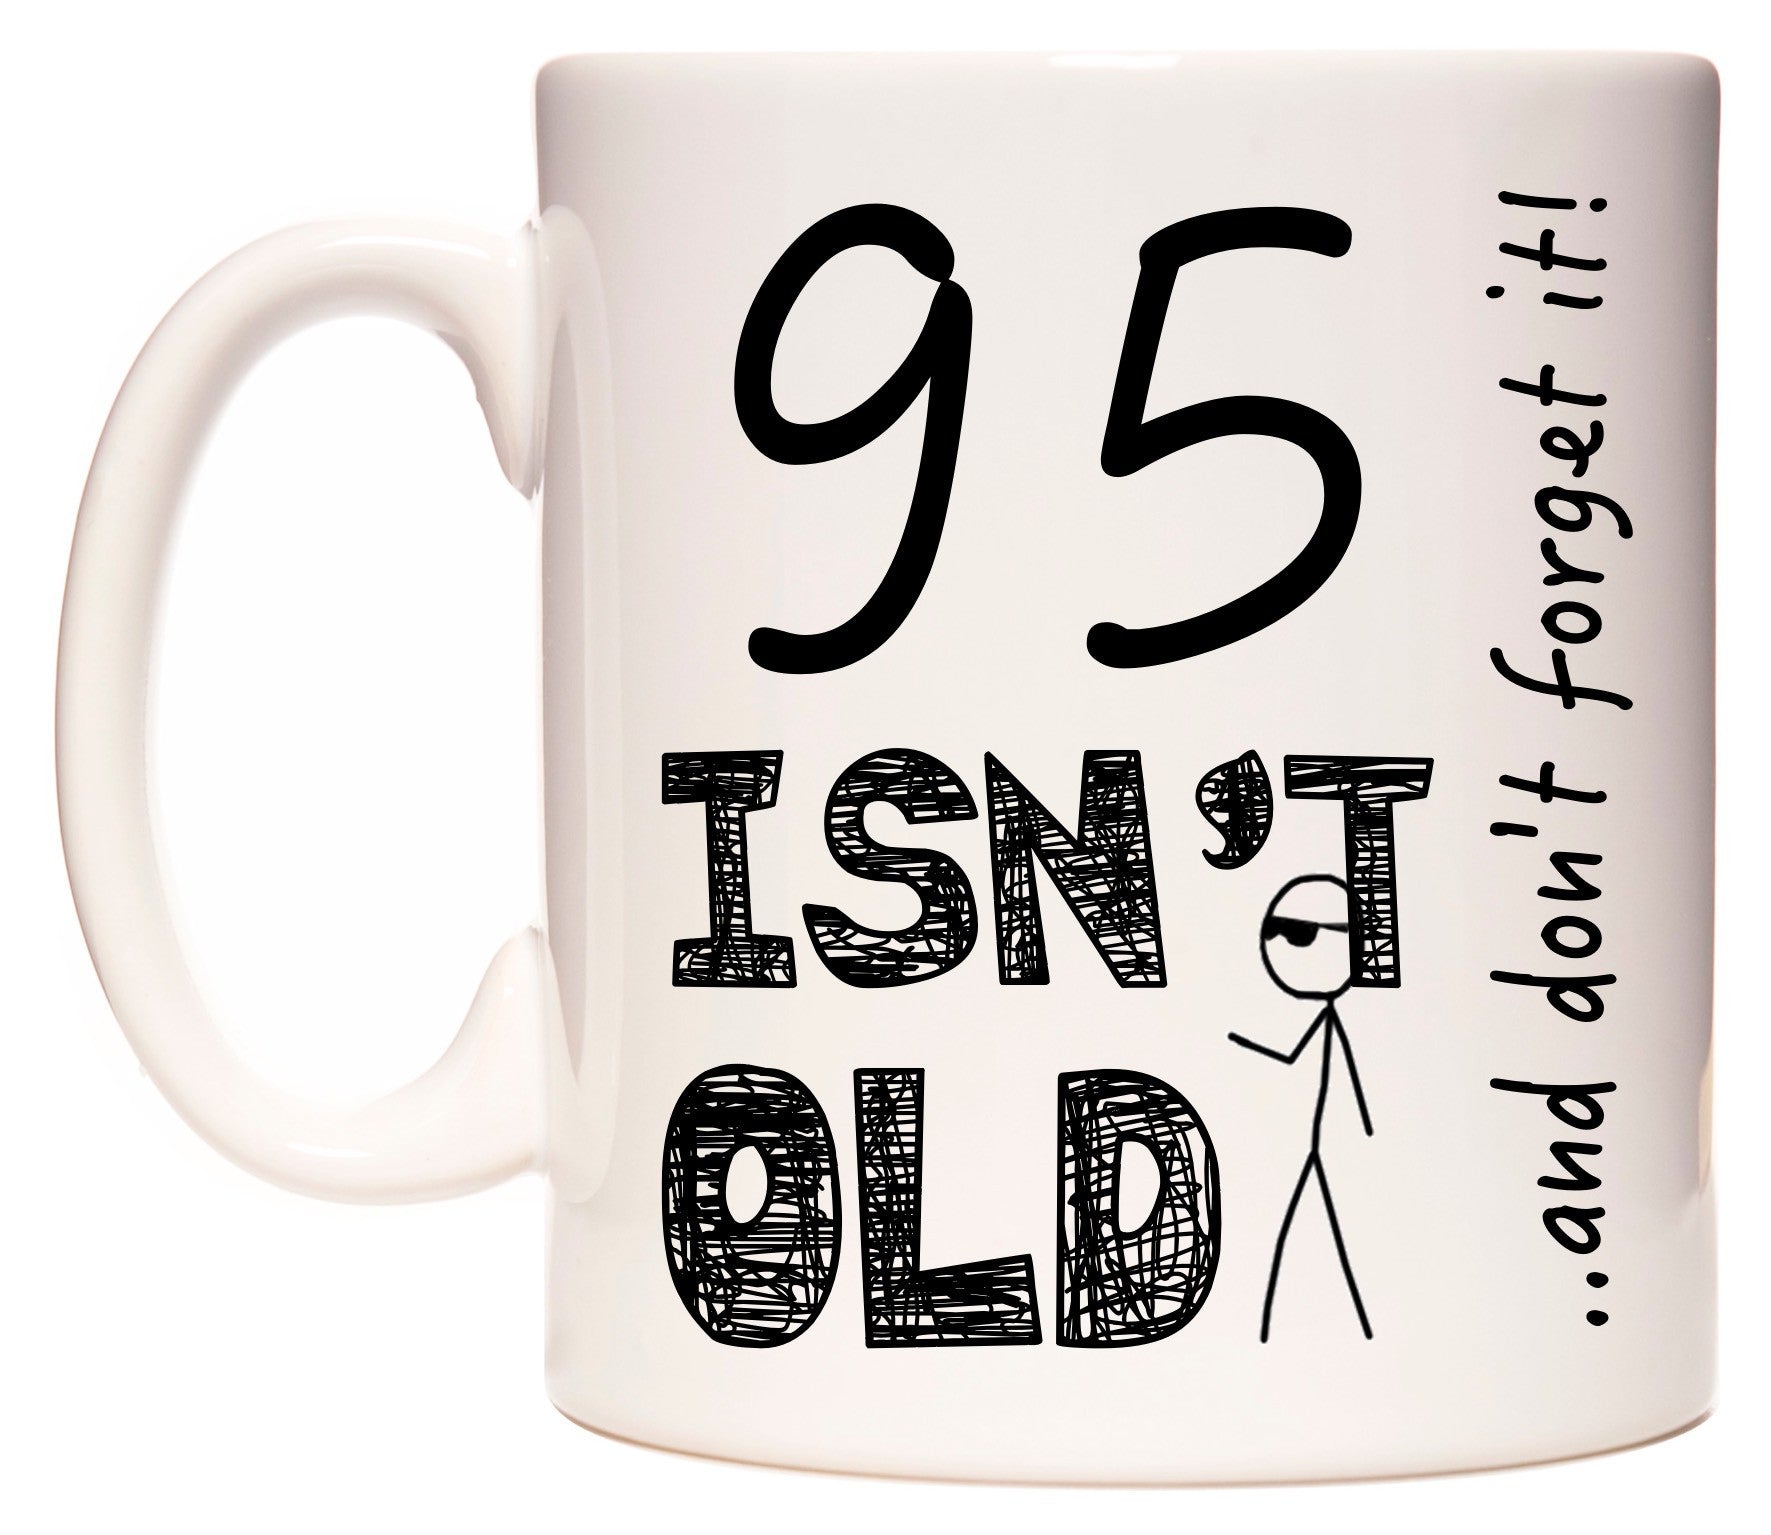 This mug features 95 Isn't Old